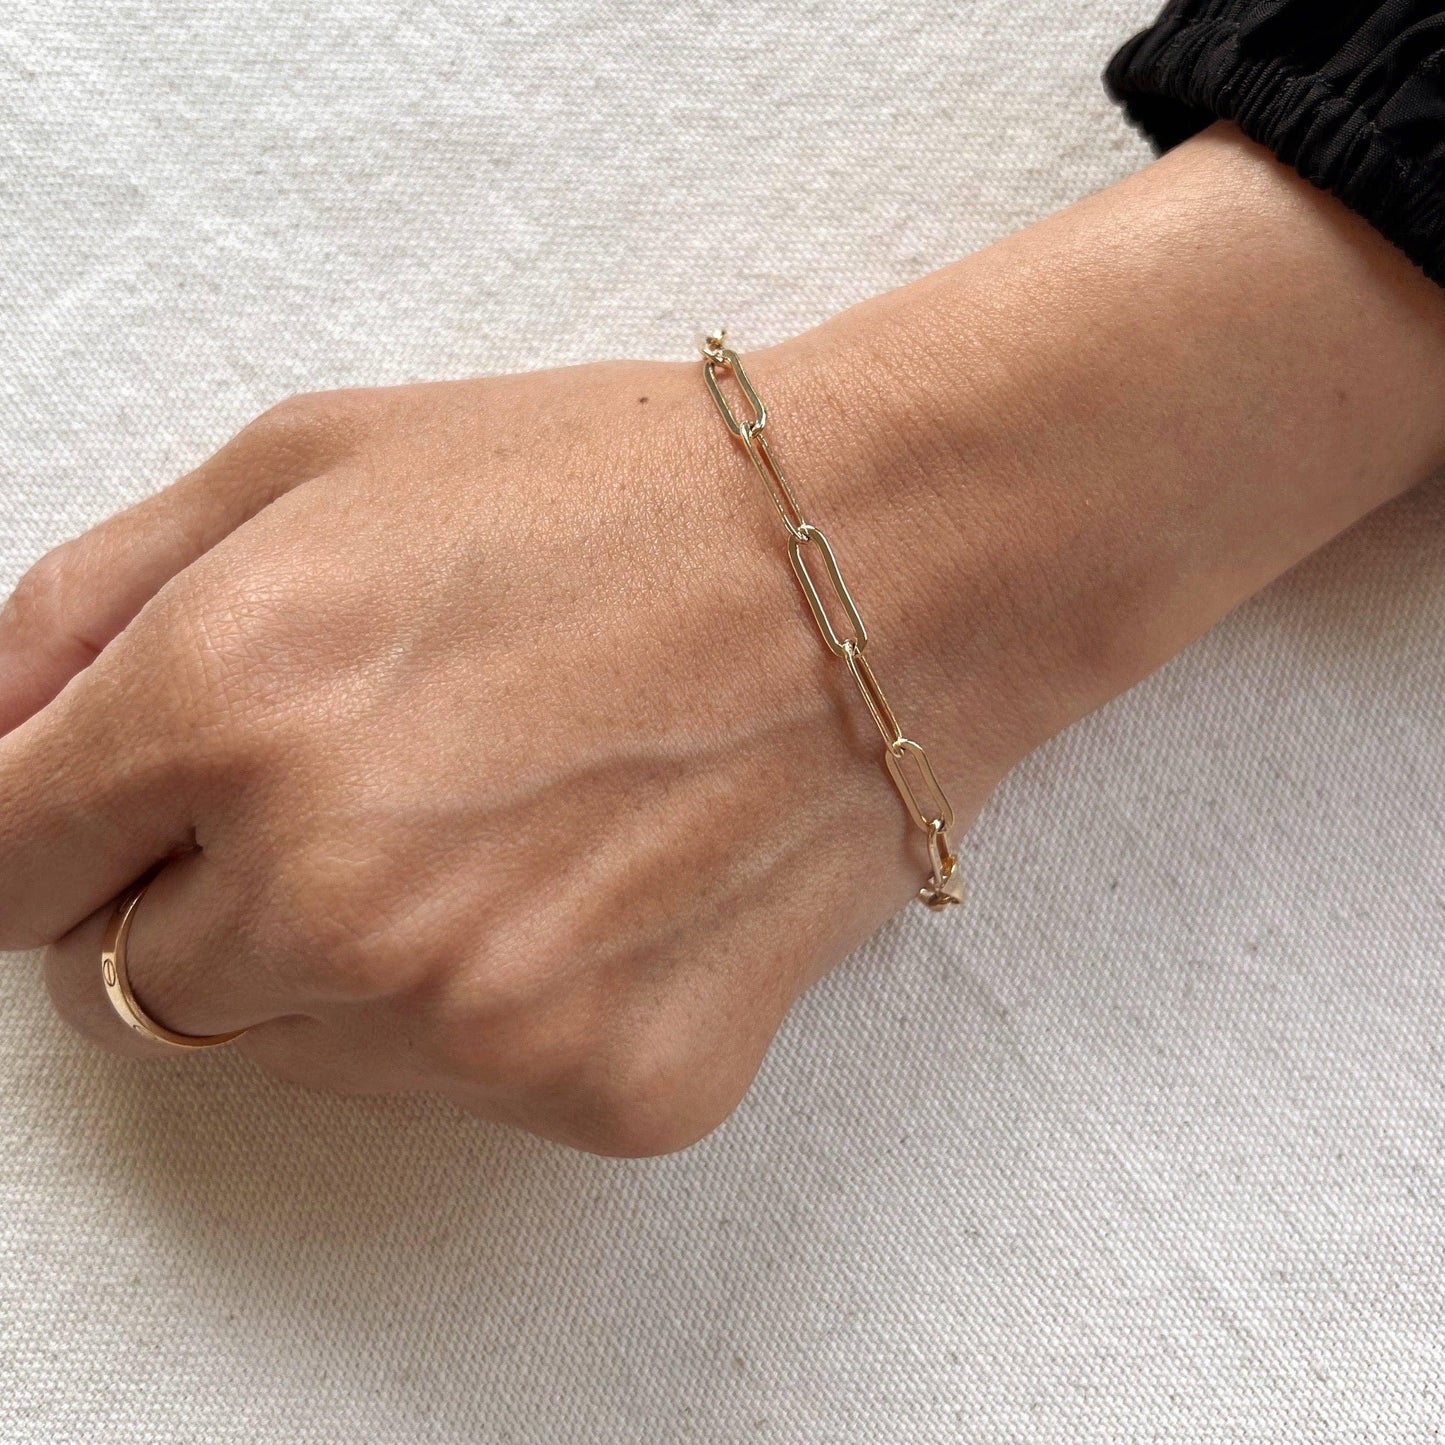 18k Gold Filled Classic Paperclip Bracelet w/ extender - HERS